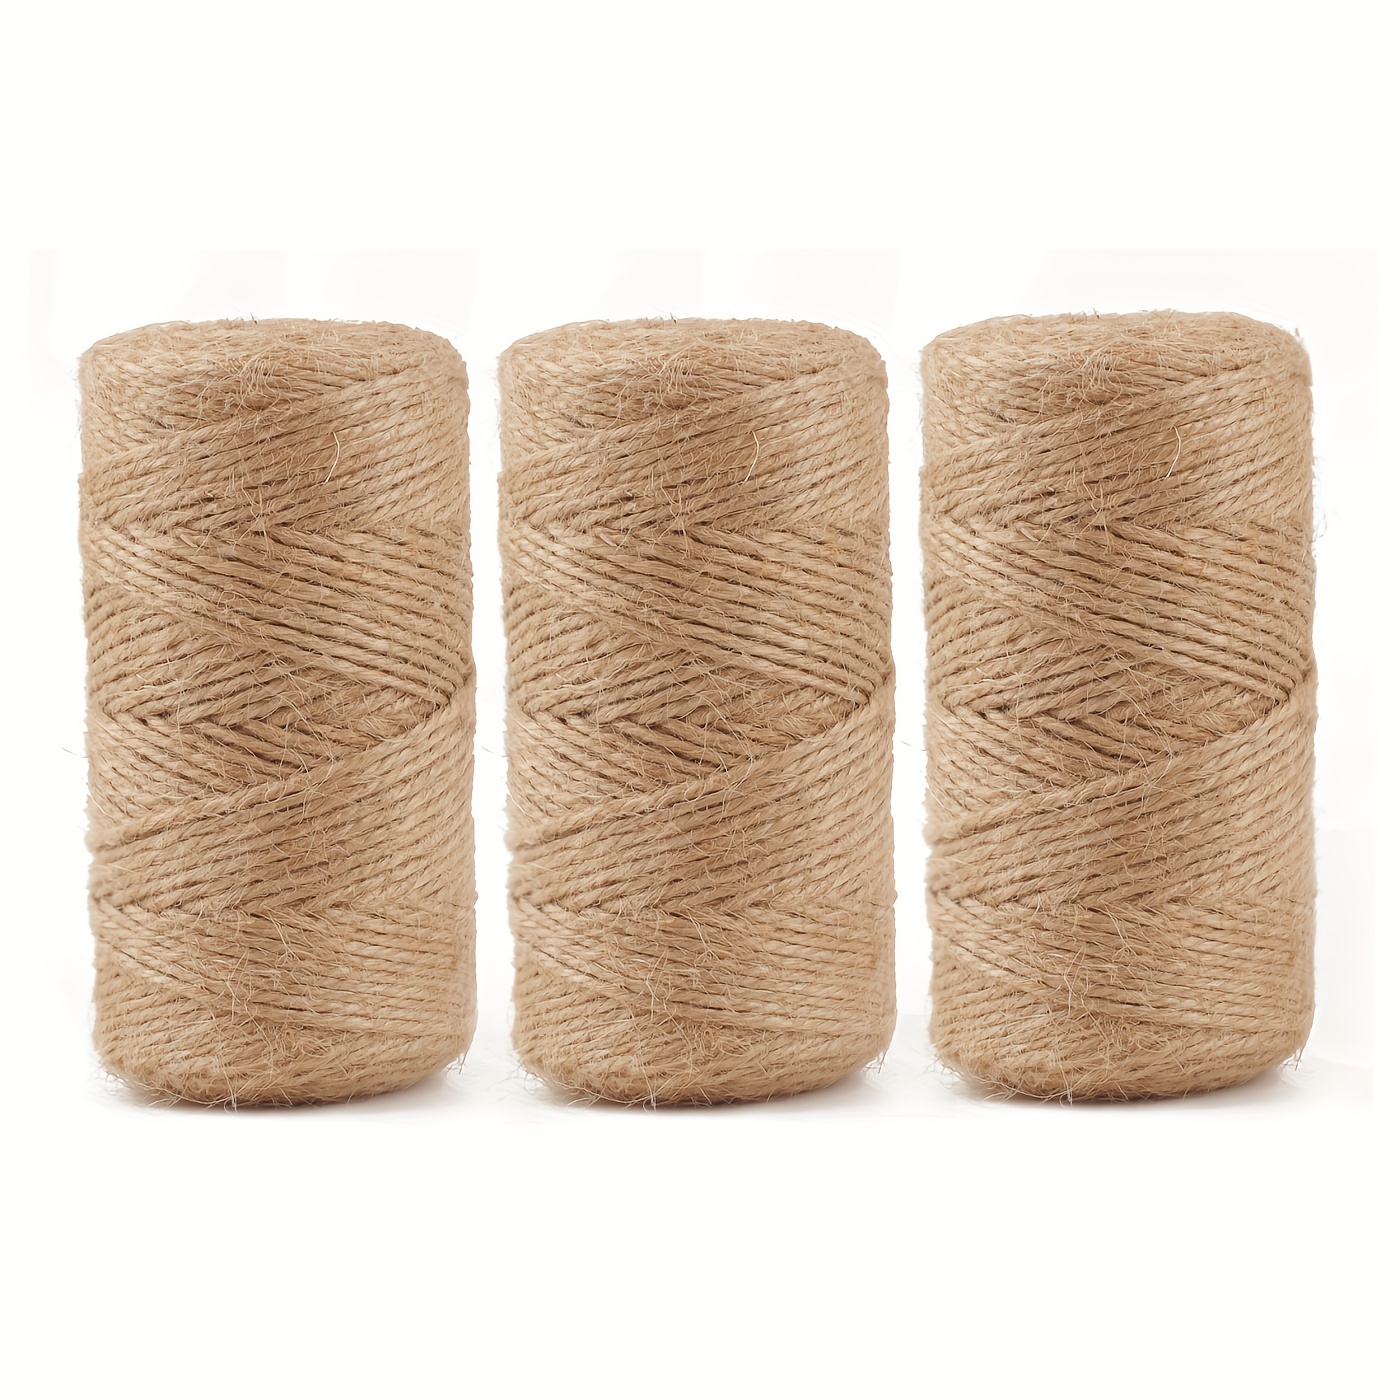  JIUXQT 197Ft 5mm Twine String 3ply Thin Ribbon Hemp Twine Jute  Rope String Twine Natural Jute Twine String for Crafts DIY Home Picture  Gift Wrapping Craft Plant Garden Christmas Handmade Arts